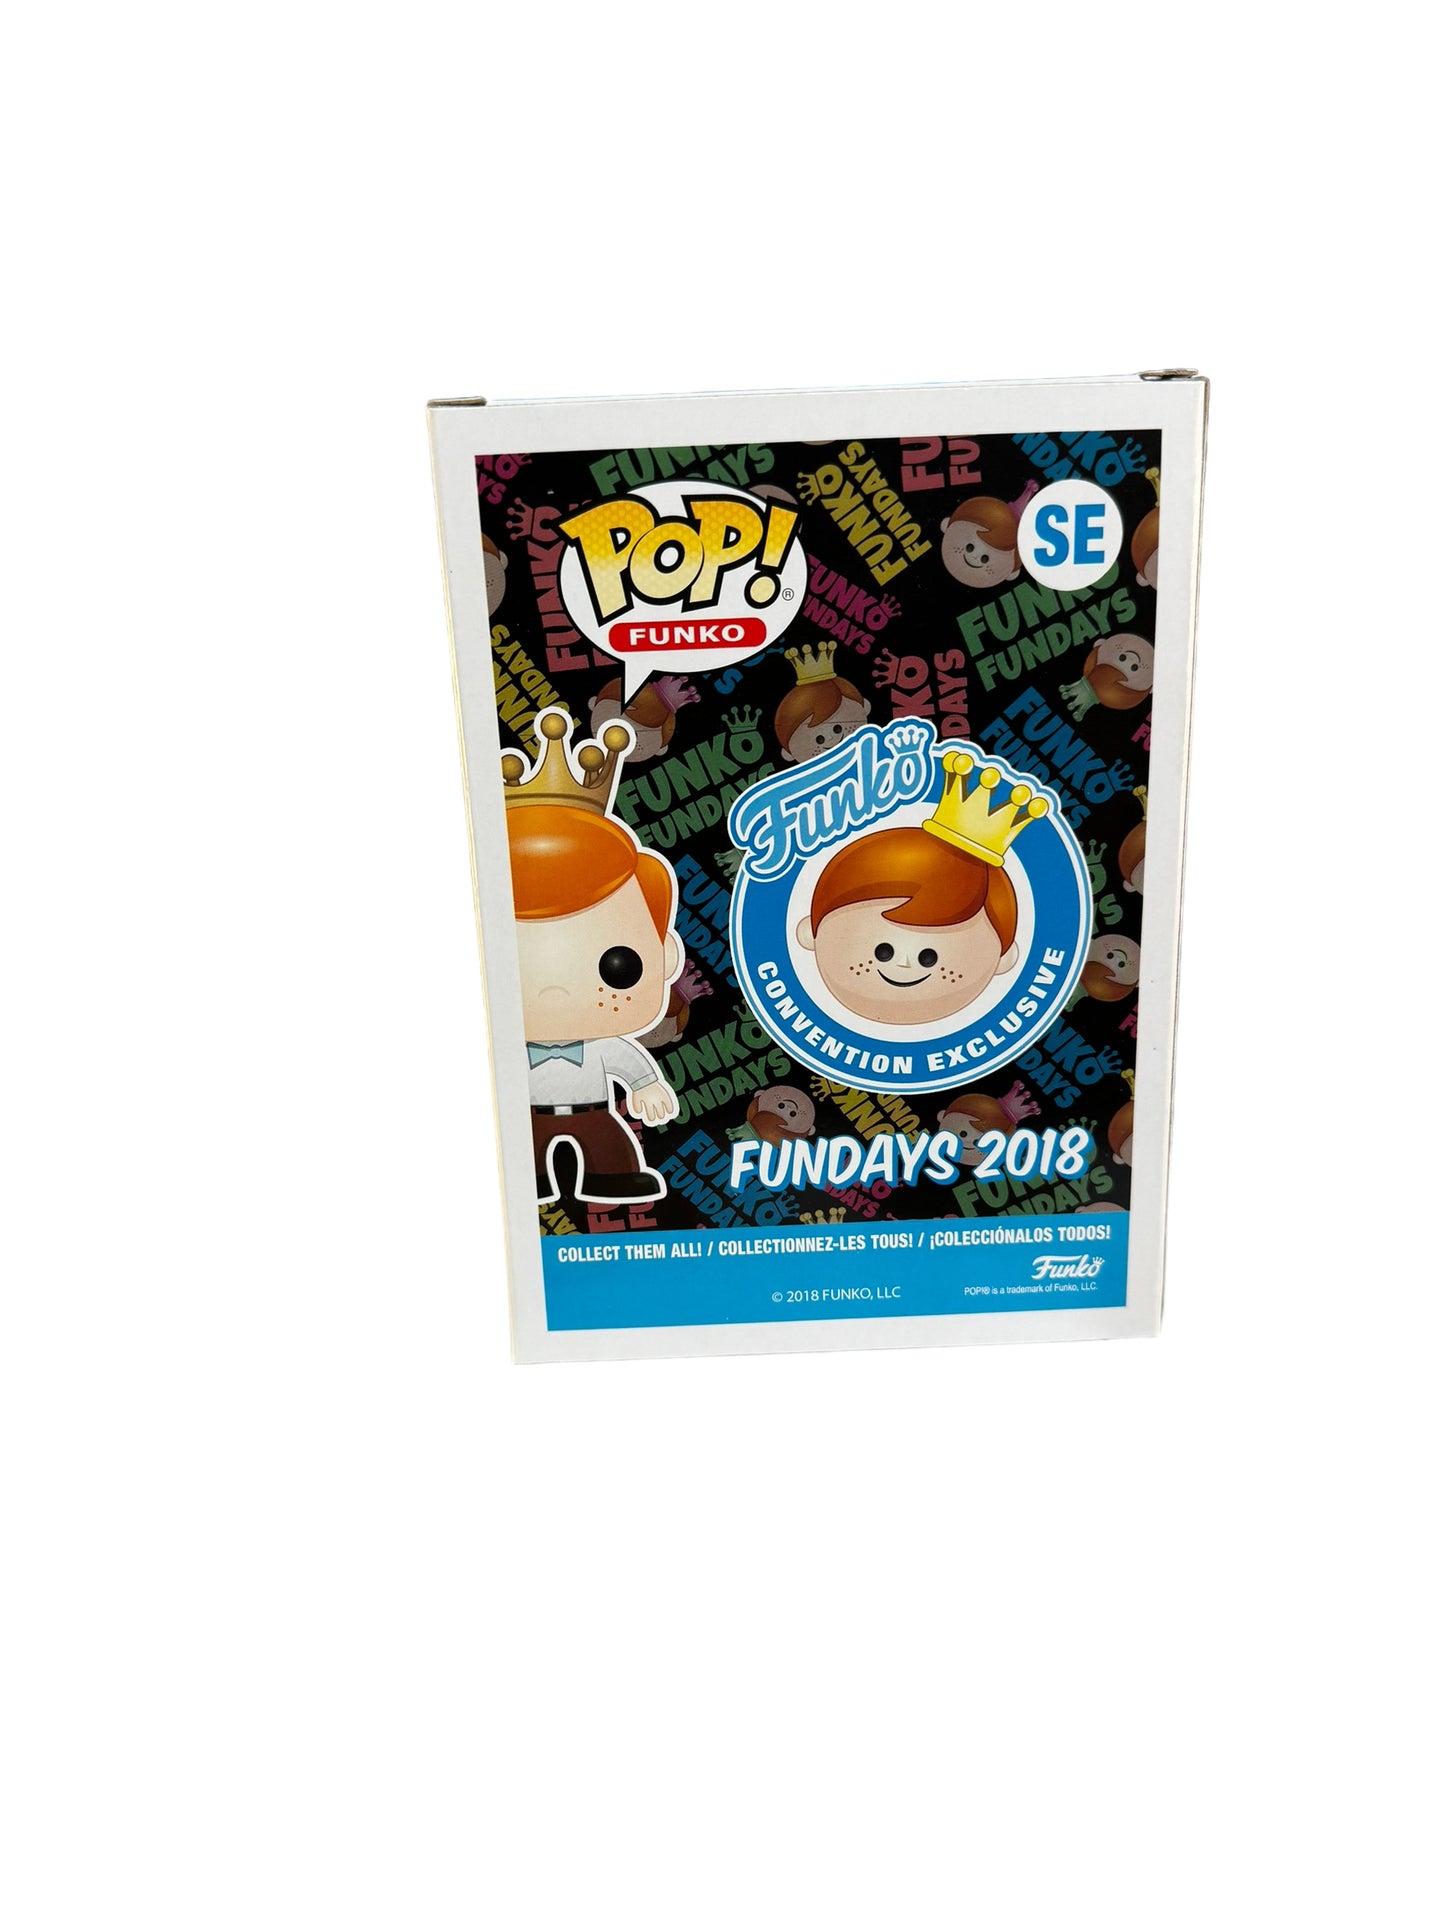 Sold 4/15 - 2018 SDCC Freddy Funko Pennywise LE 4000